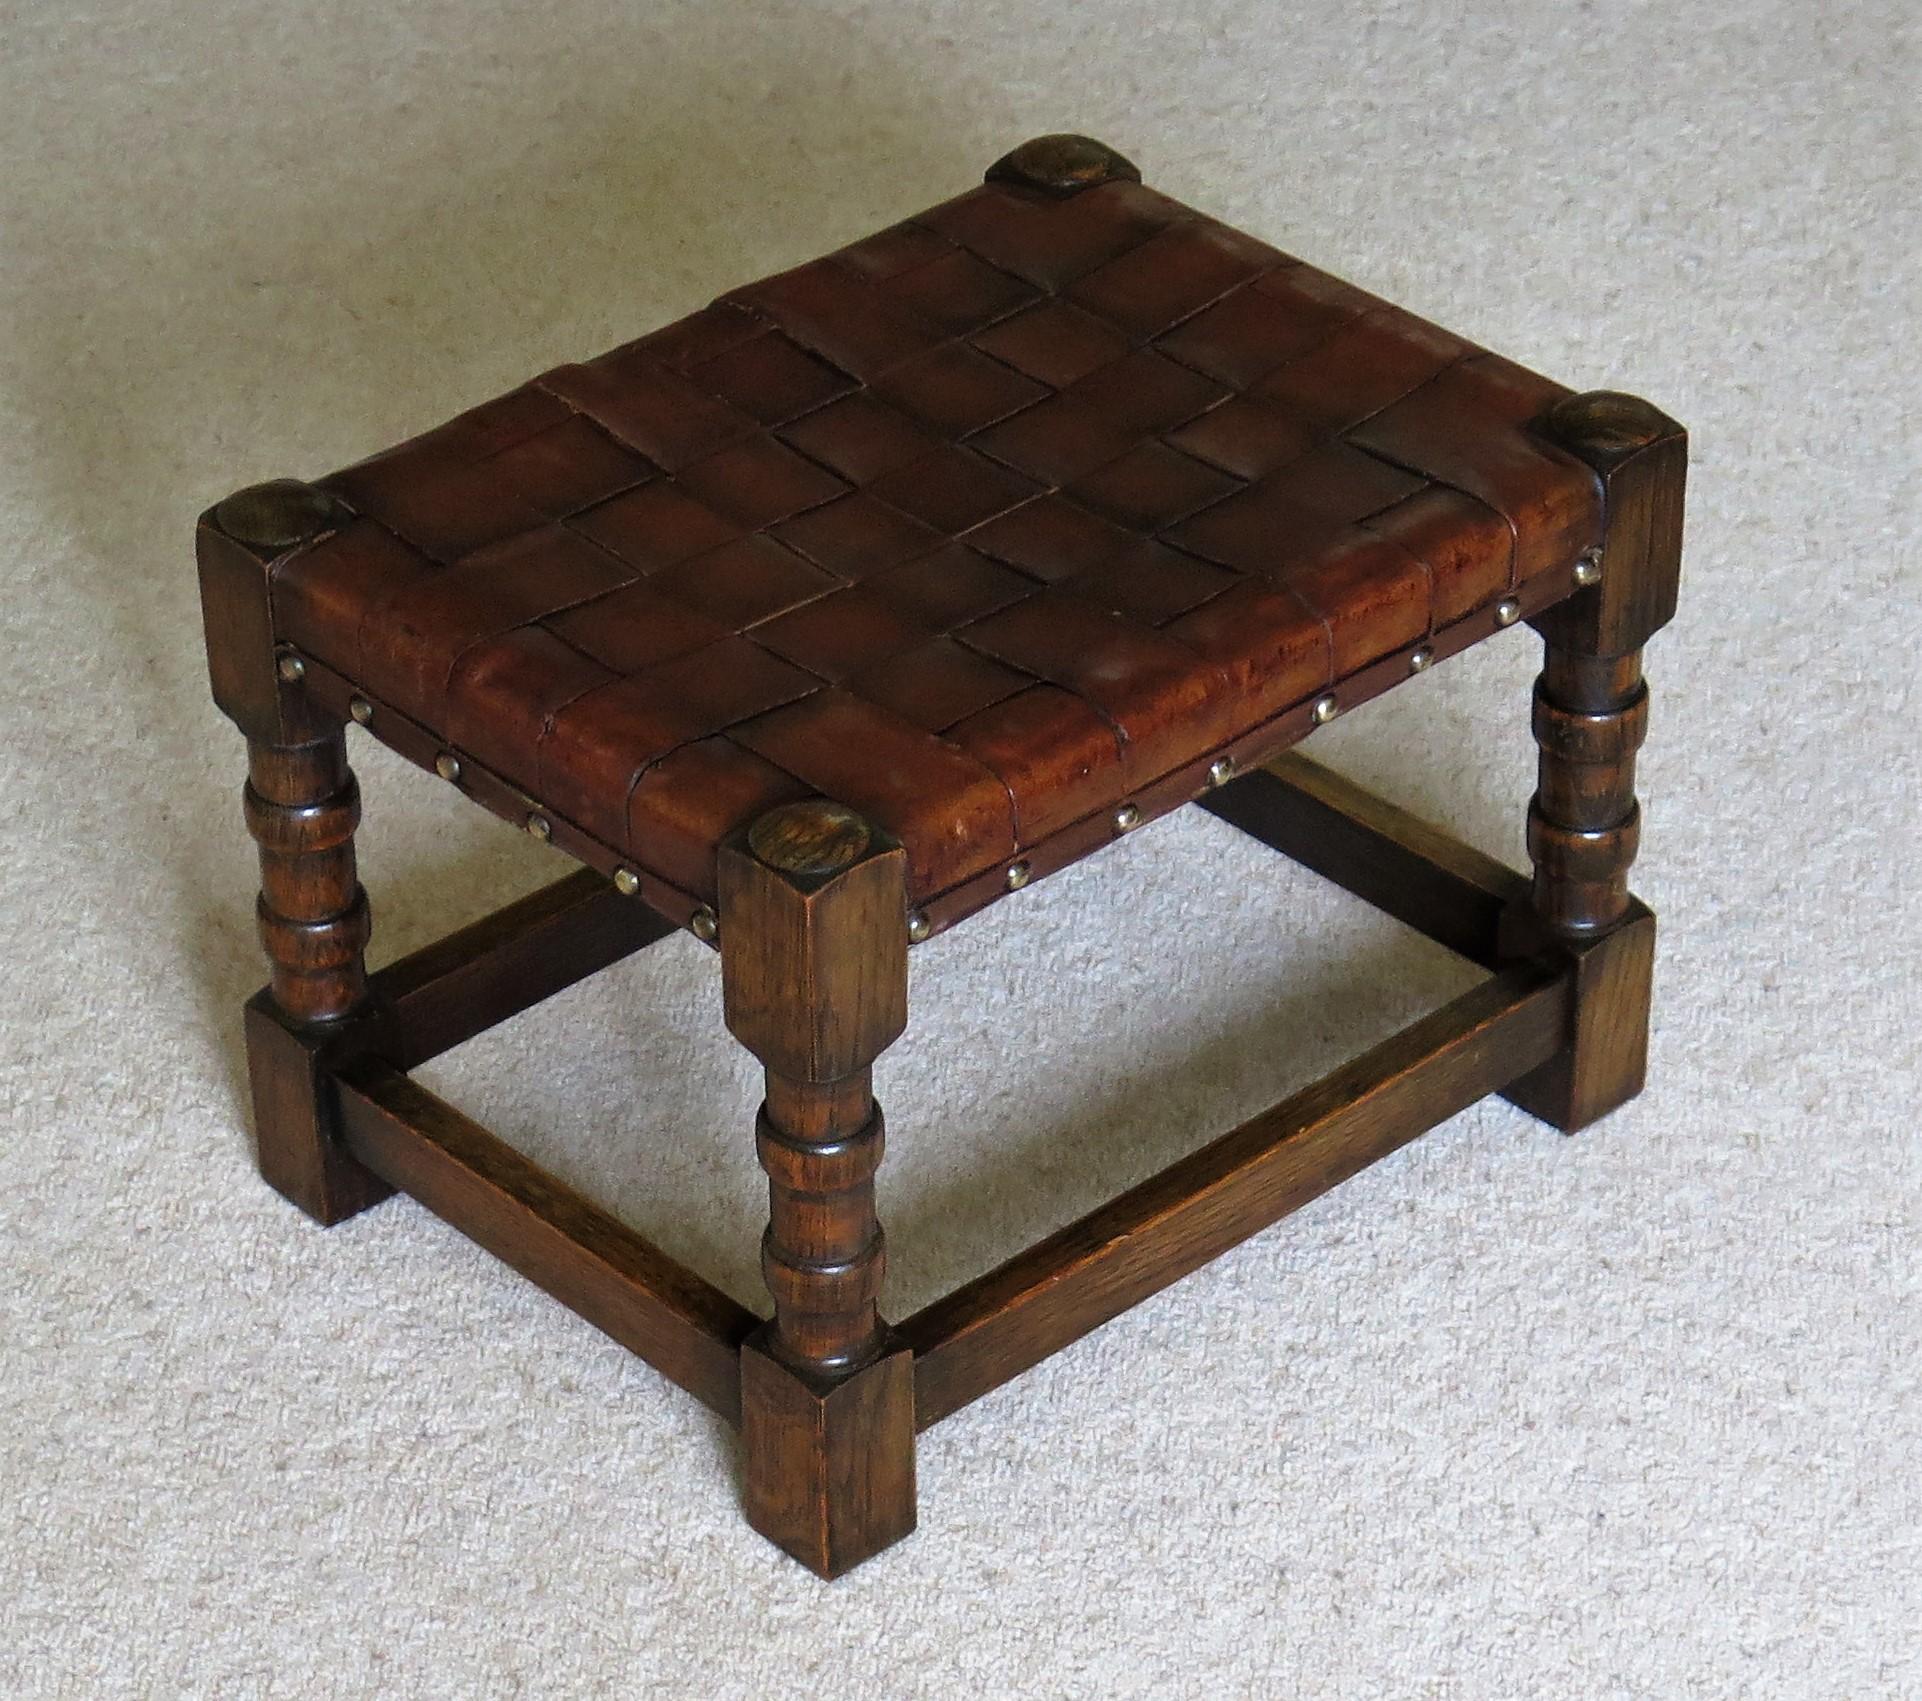 This is a good handmade stool with a well turned solid oak frame and a woven leather strap top, all dating to the Arts & Crafts period of the late 19th century.

The stool is made of solid oak. The frame joints into four legs with ring turned